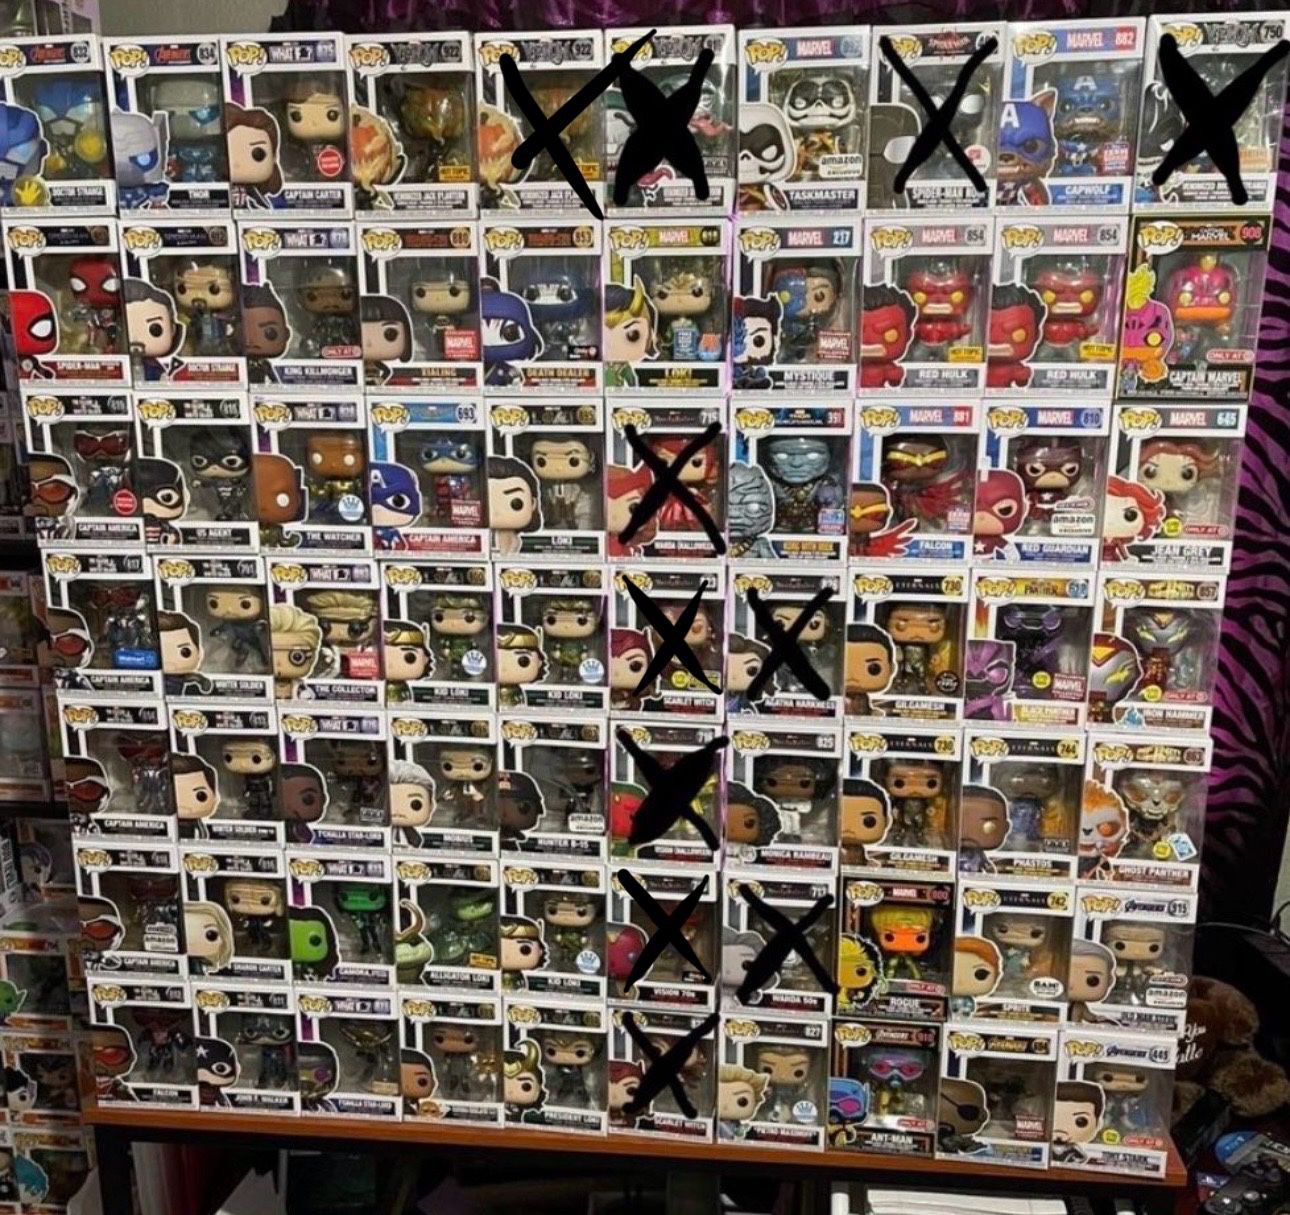 DC, Marvel, Tv, Movies, Anime Funko Pops For Sale